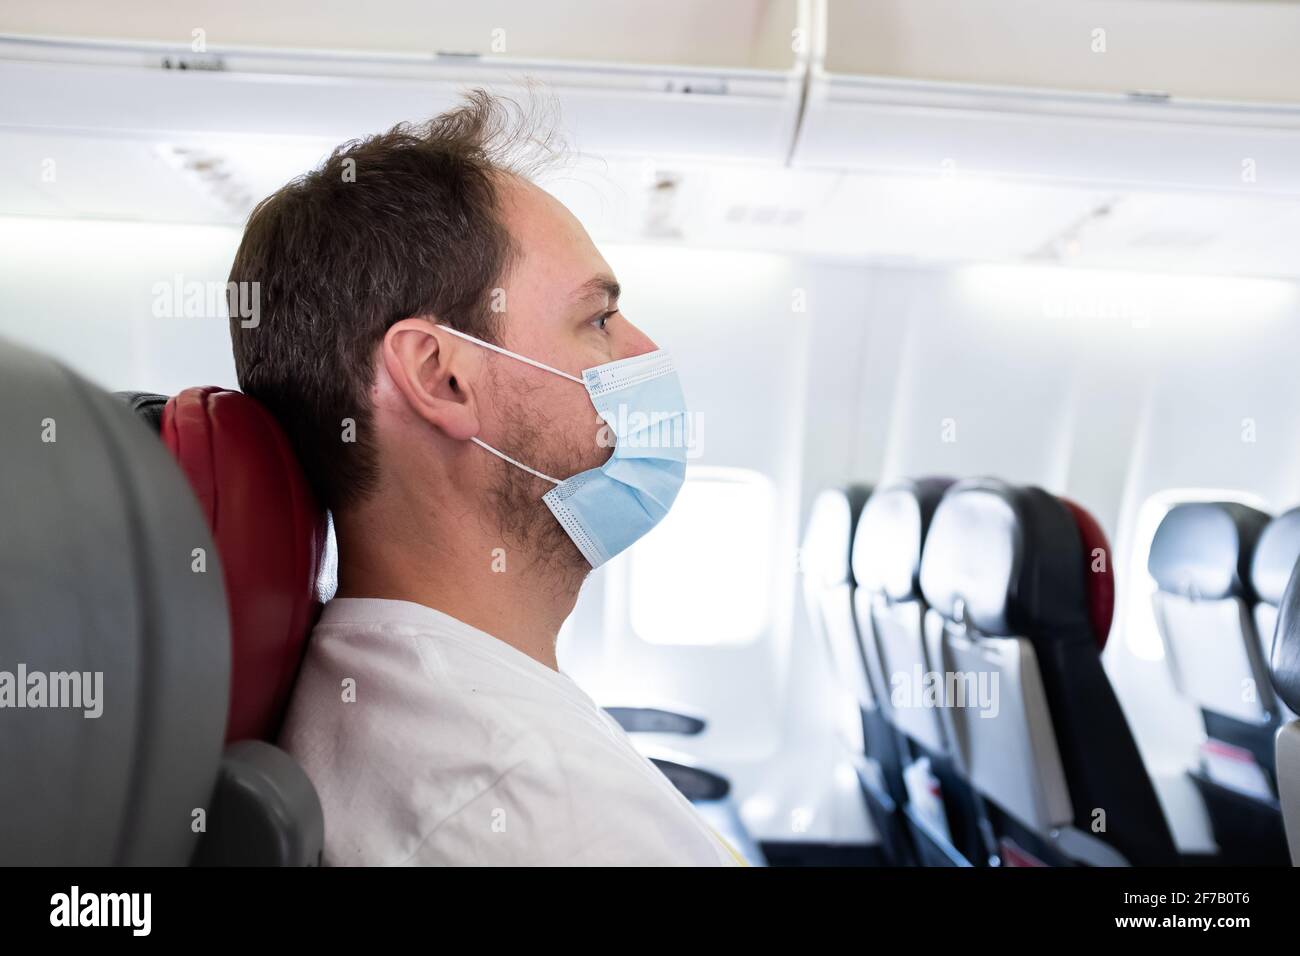 Man on an airplane wearing a surgical mask traveling during the COVID-19 coronavirus pandemic Stock Photo